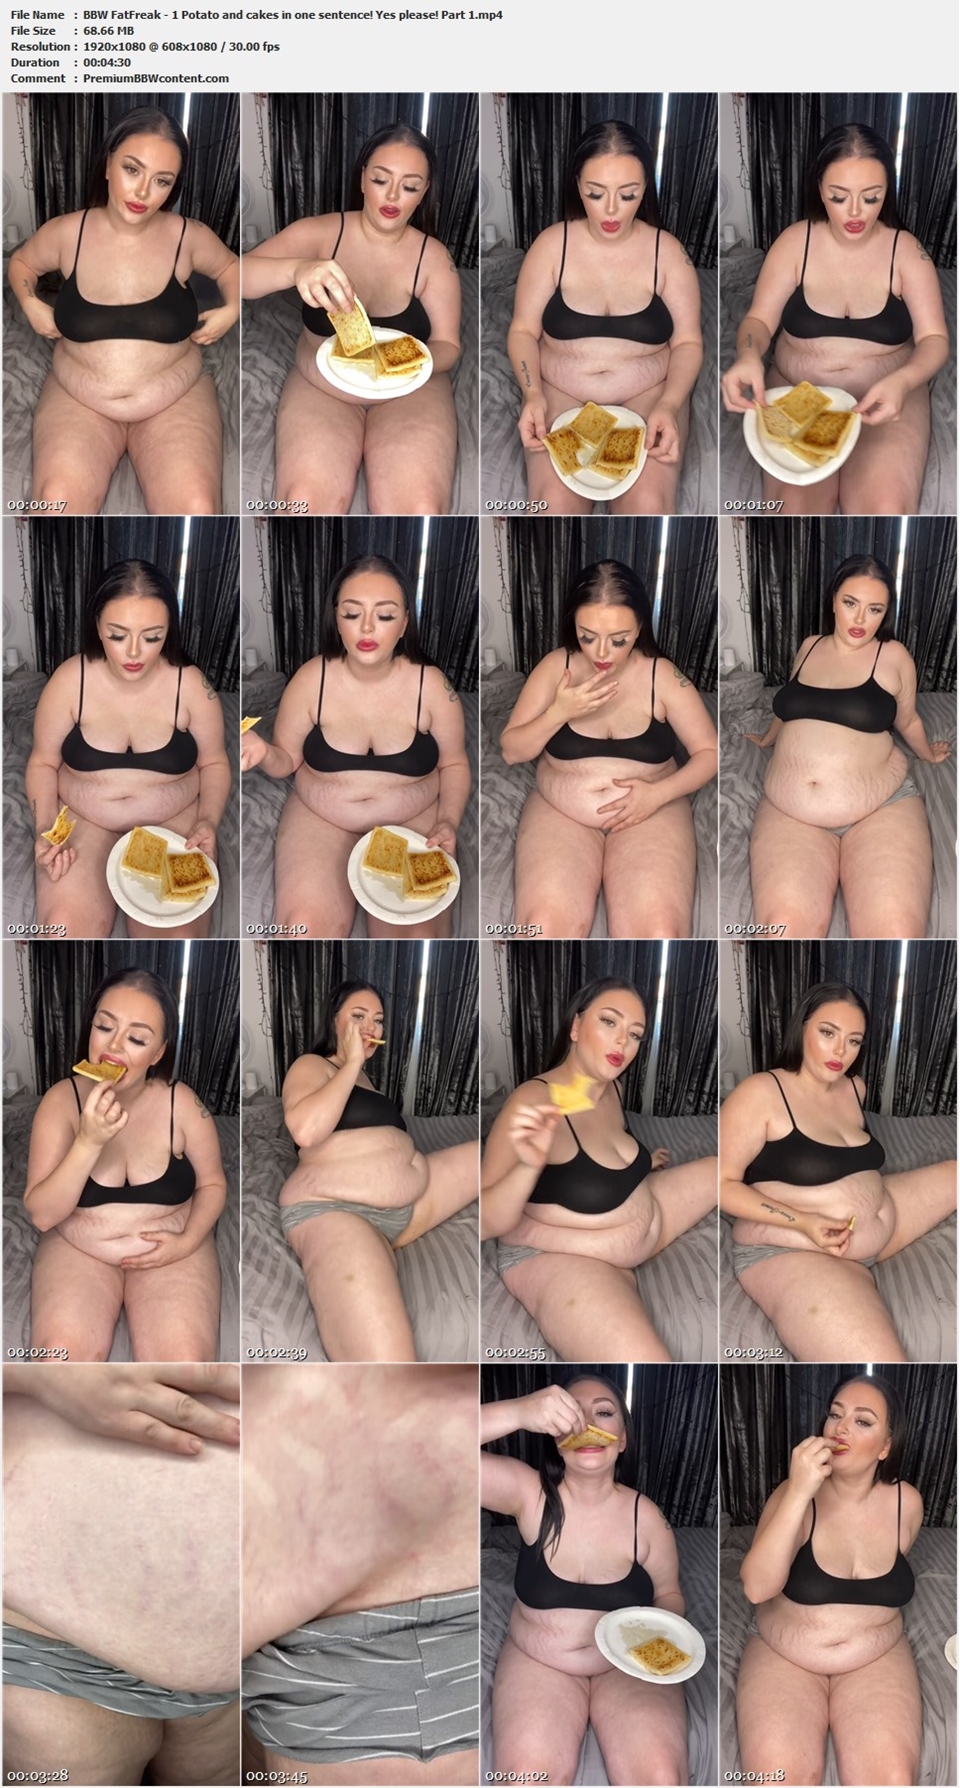 BBW FatFreak - 1 Potato and cakes in one sentence! Yes please! Part 1 thumbnails